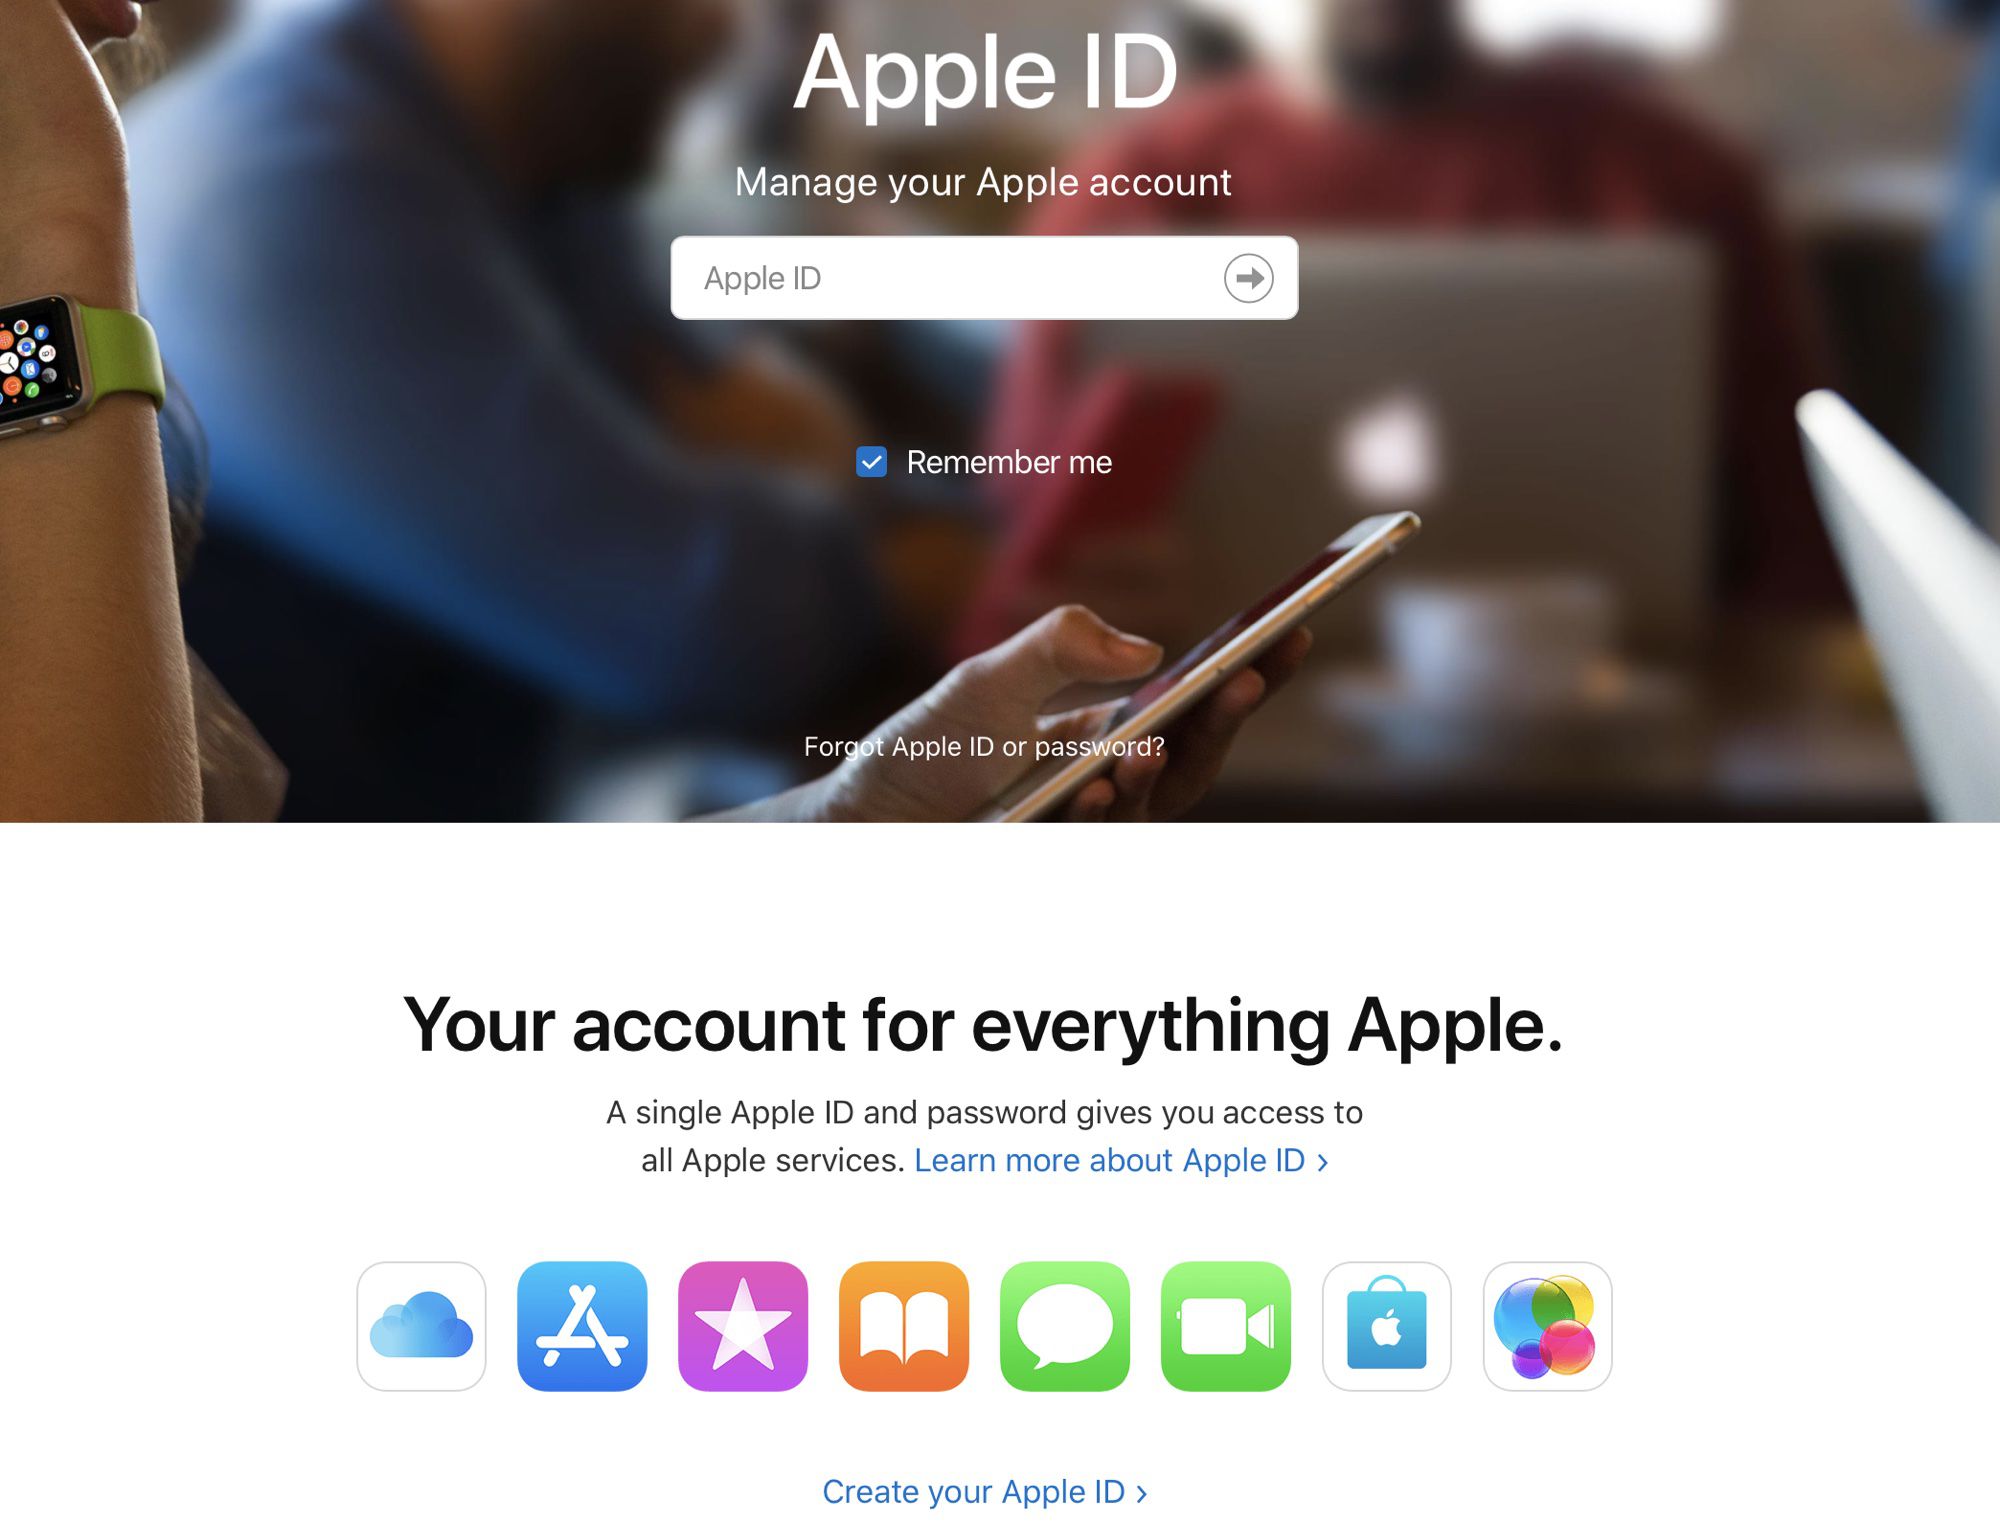 How to Create an Apple ID From Any Device Using the Web - MacRumors